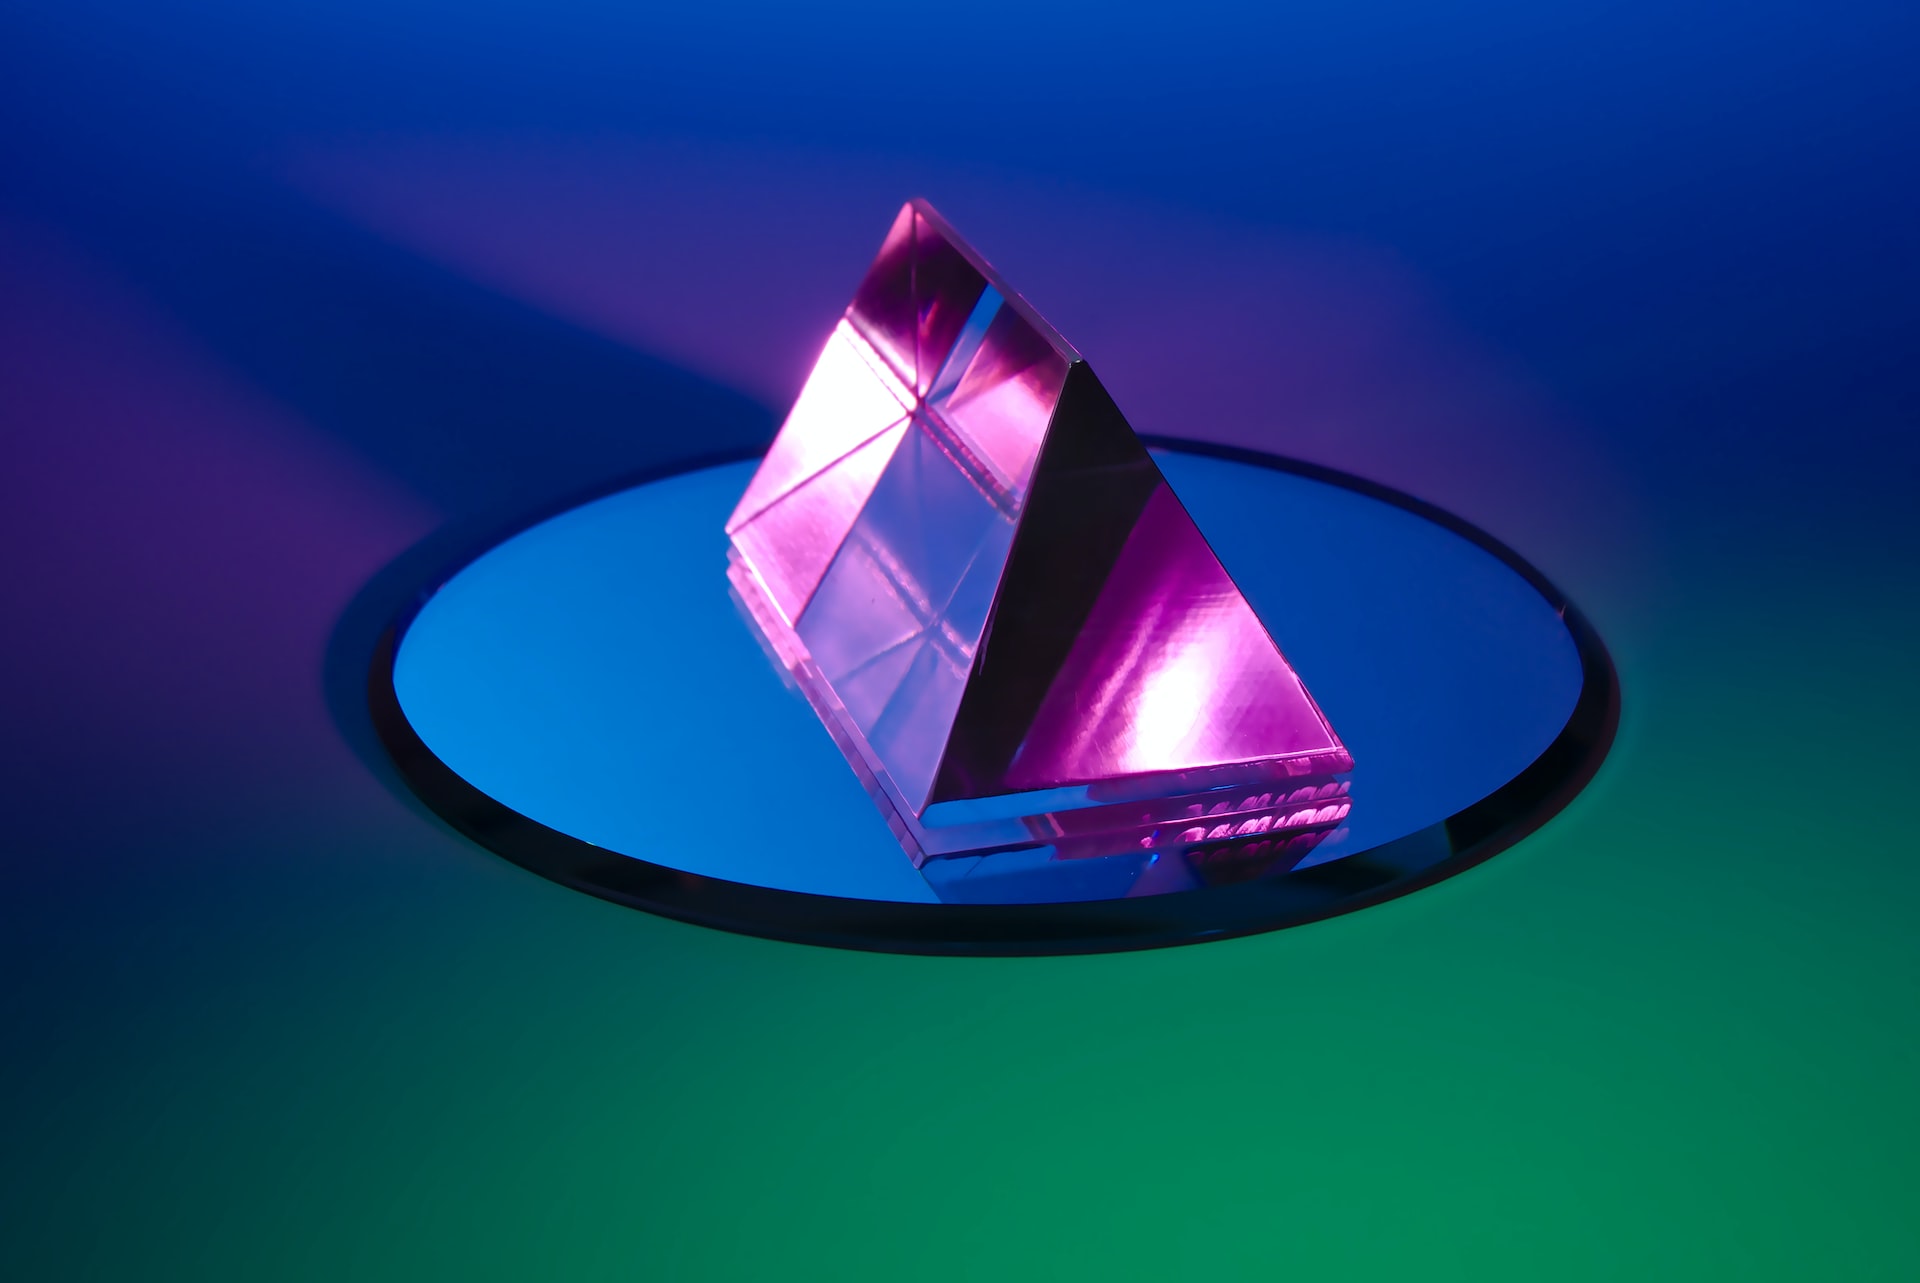 A neon pink prism on round blue mirror with a blue and green gradient background